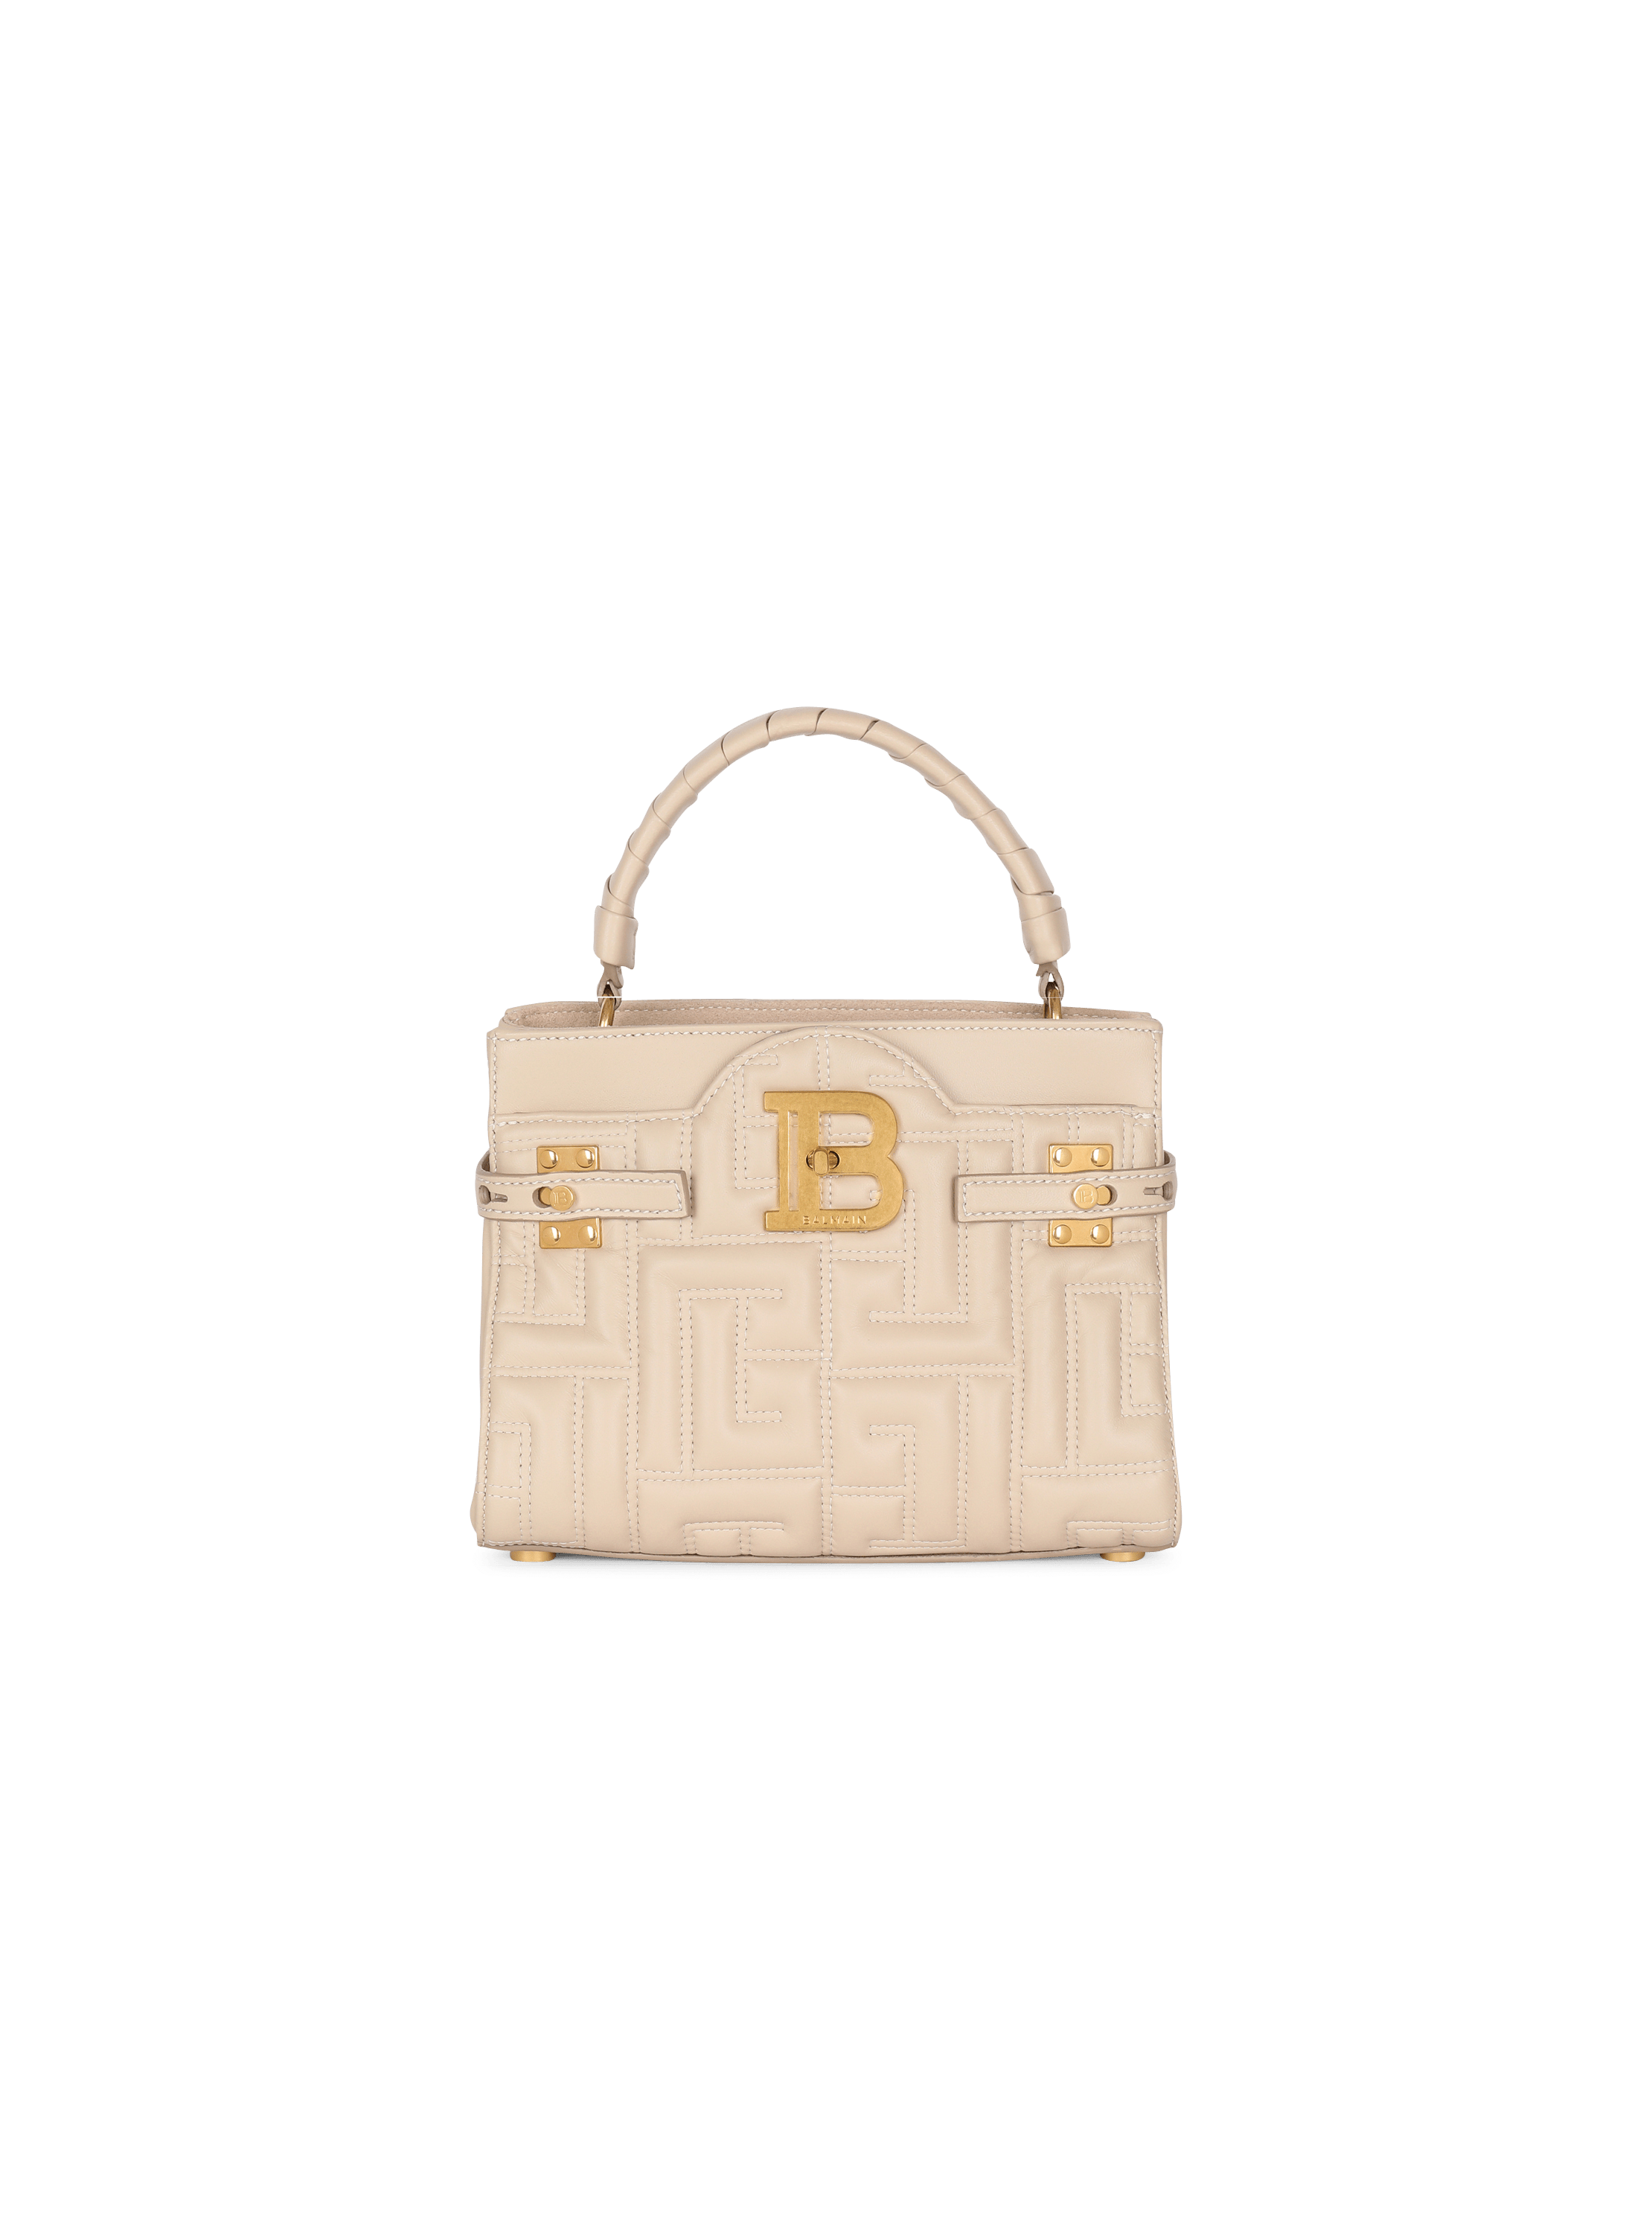 B-Buzz 22 Top Handle bag in monogram quilted leather